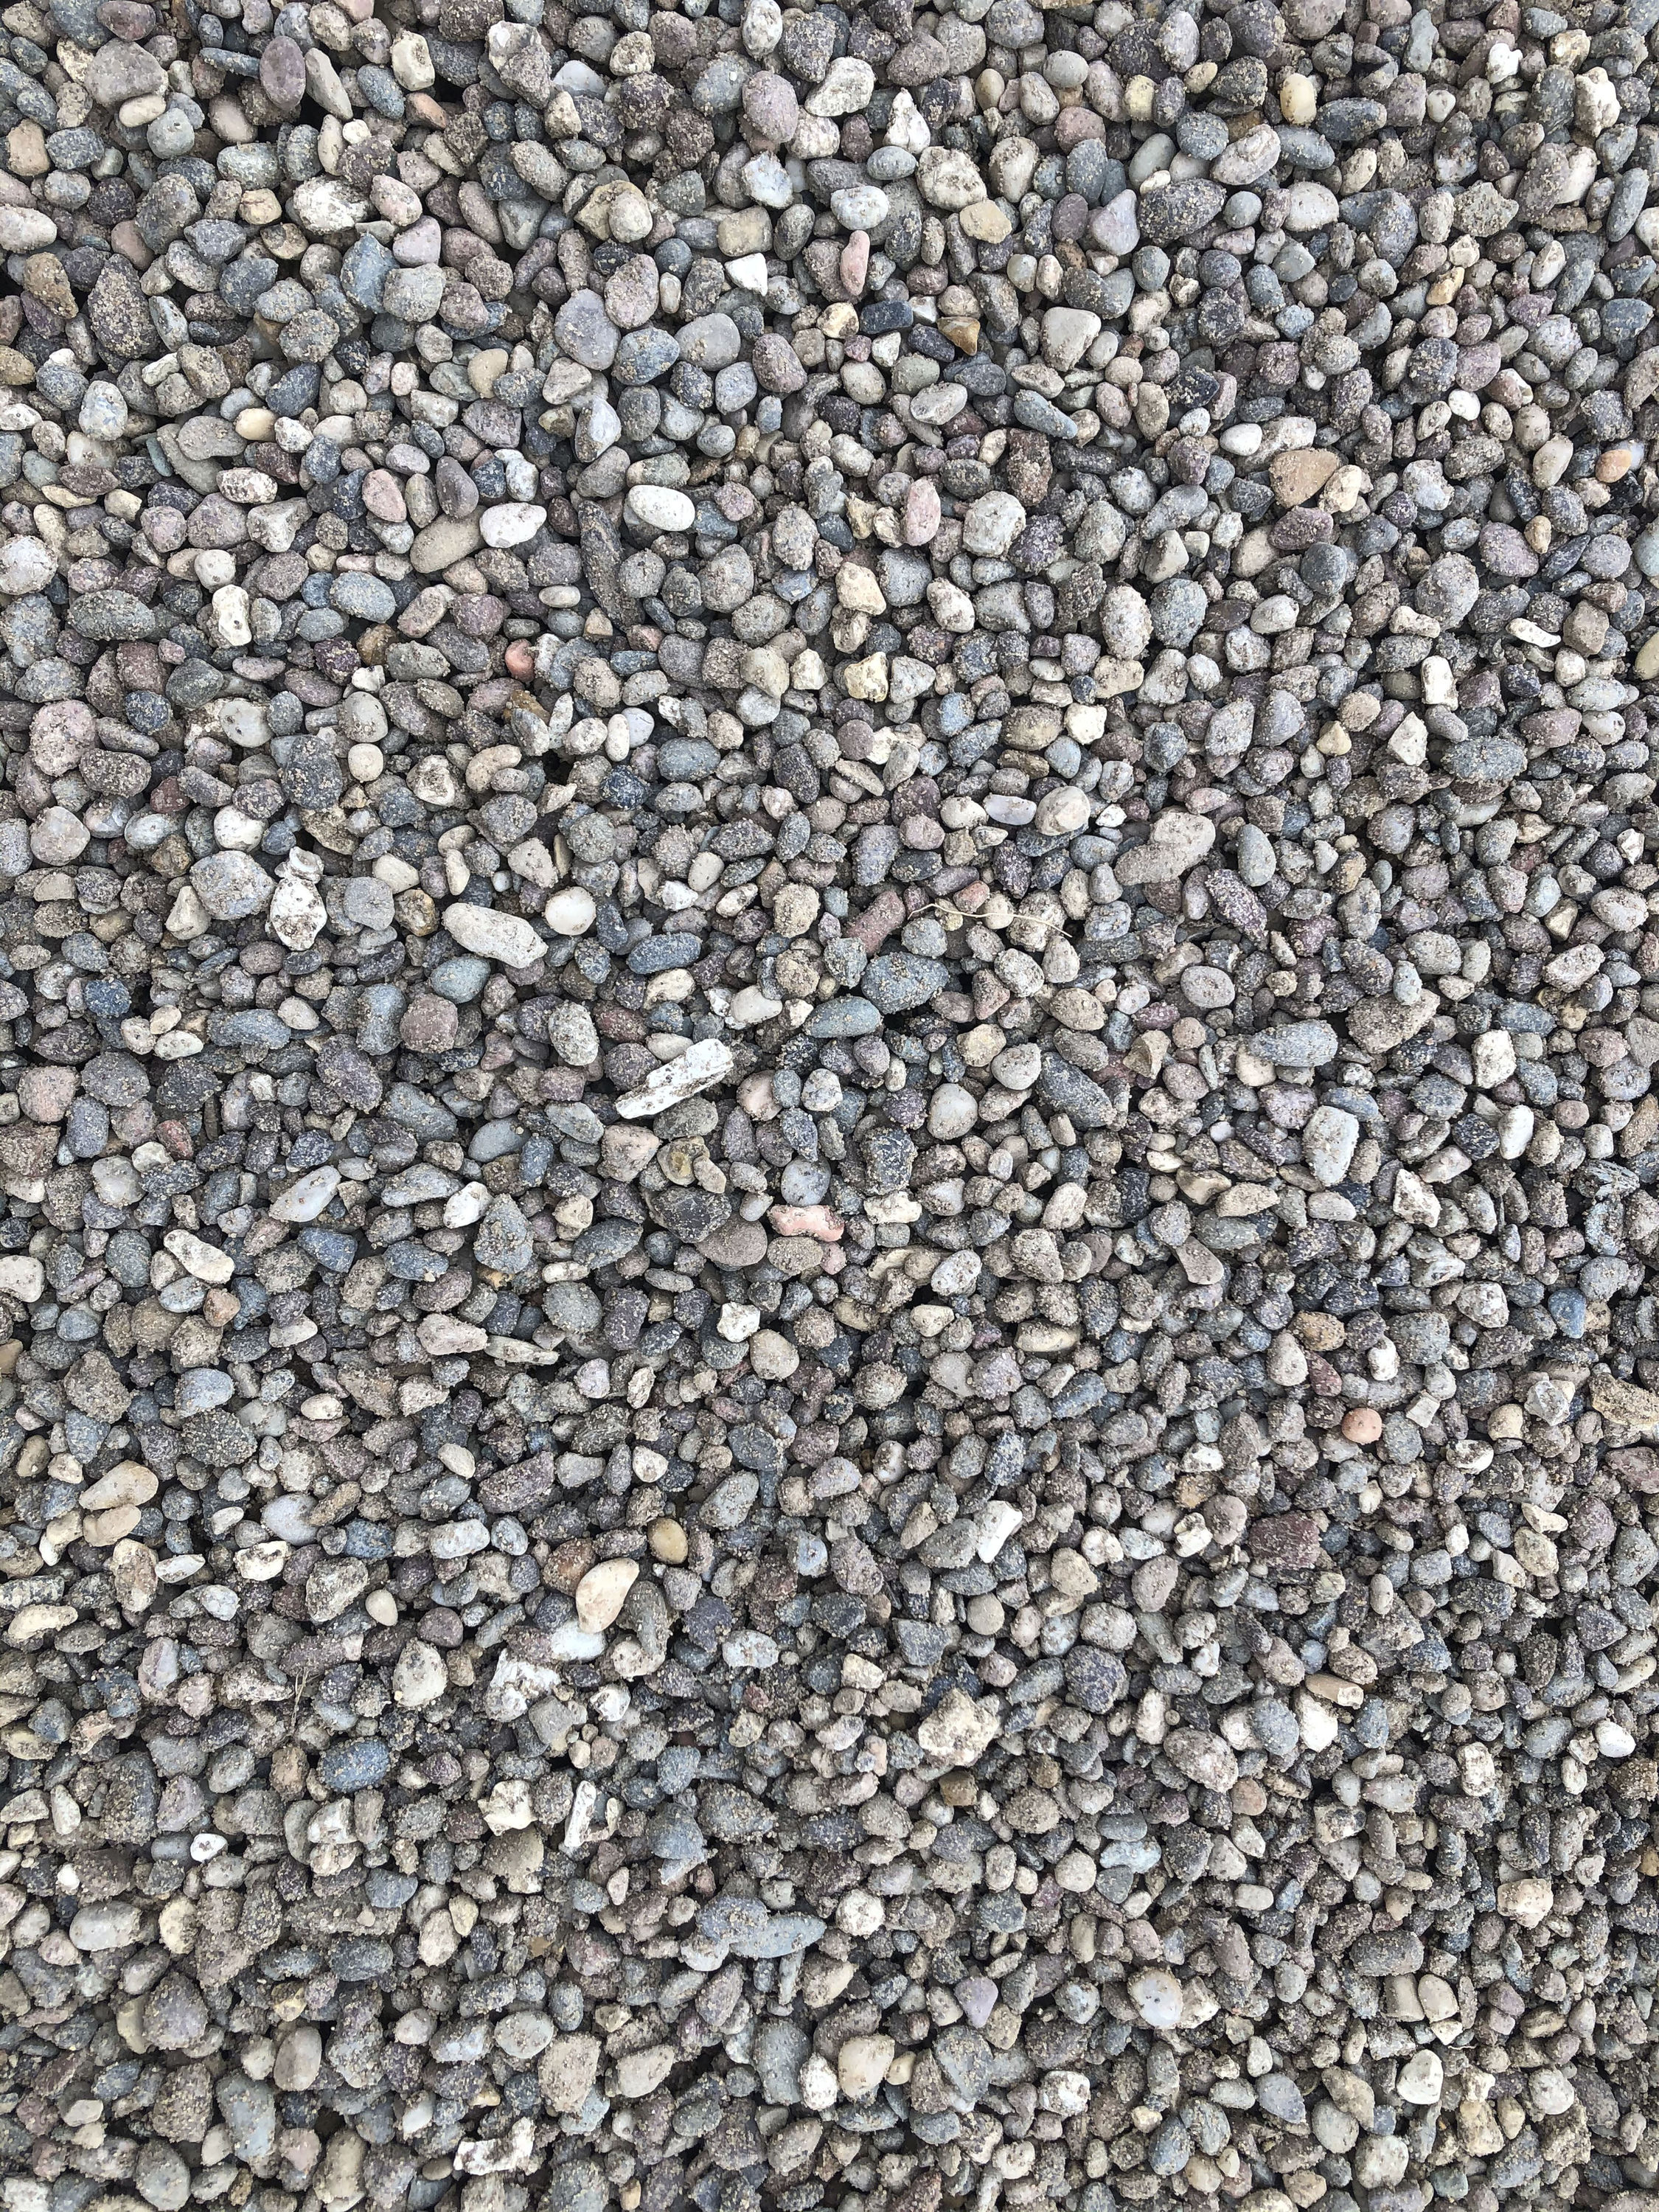 Sunniland 0.5-cu ft 37-lb Brown River Rock in the Landscaping Rock  department at Lowes.com